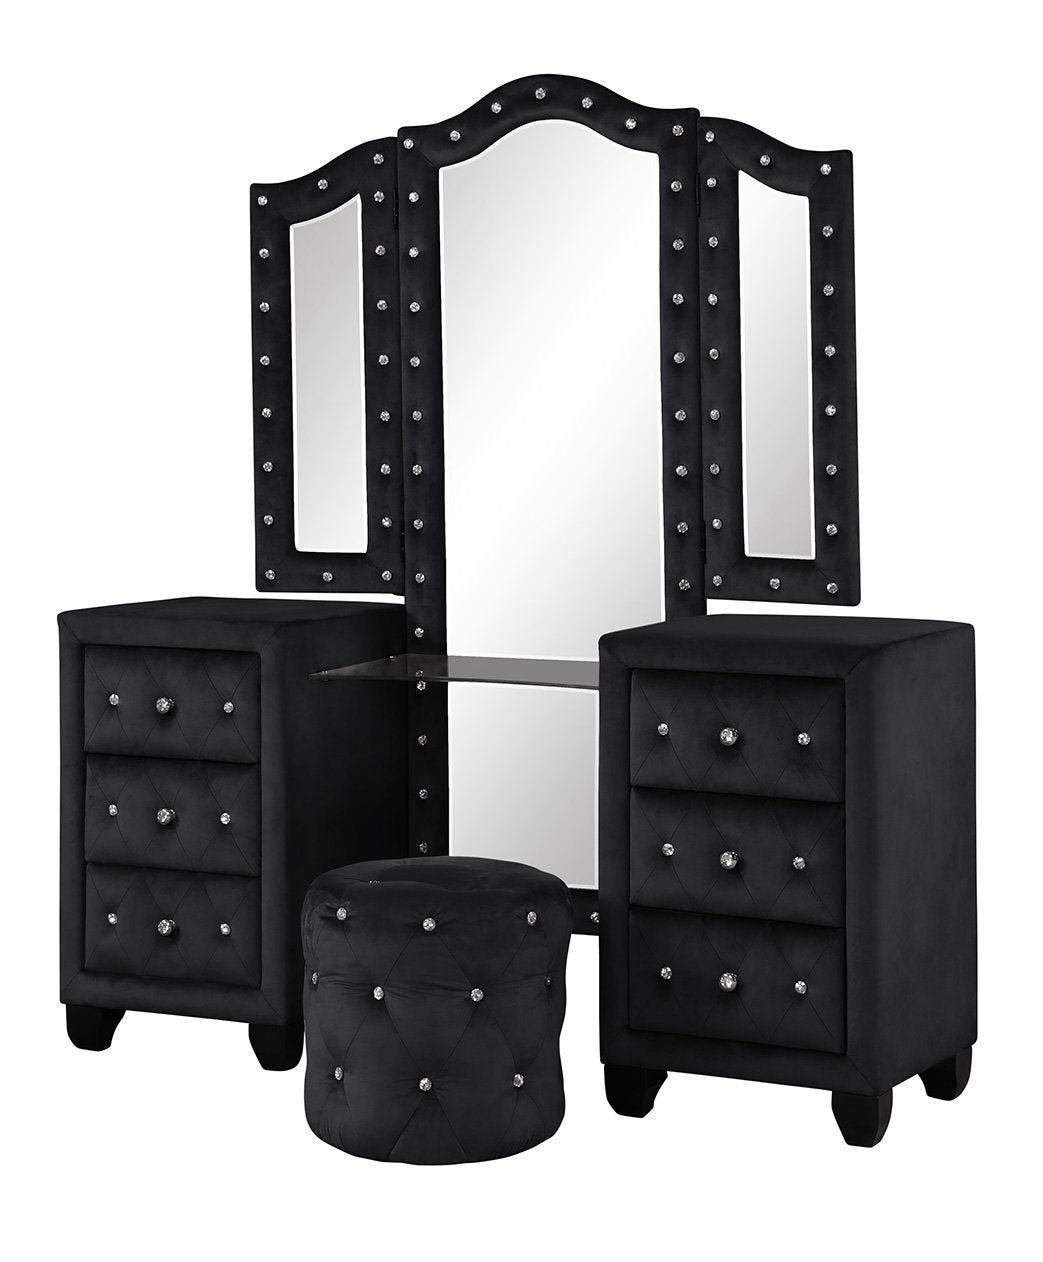 Monica luxurious Four-Poster Full 4 Pc  Vanity Bedroom Set Made with Wood in Black - Enova Luxe Home Store